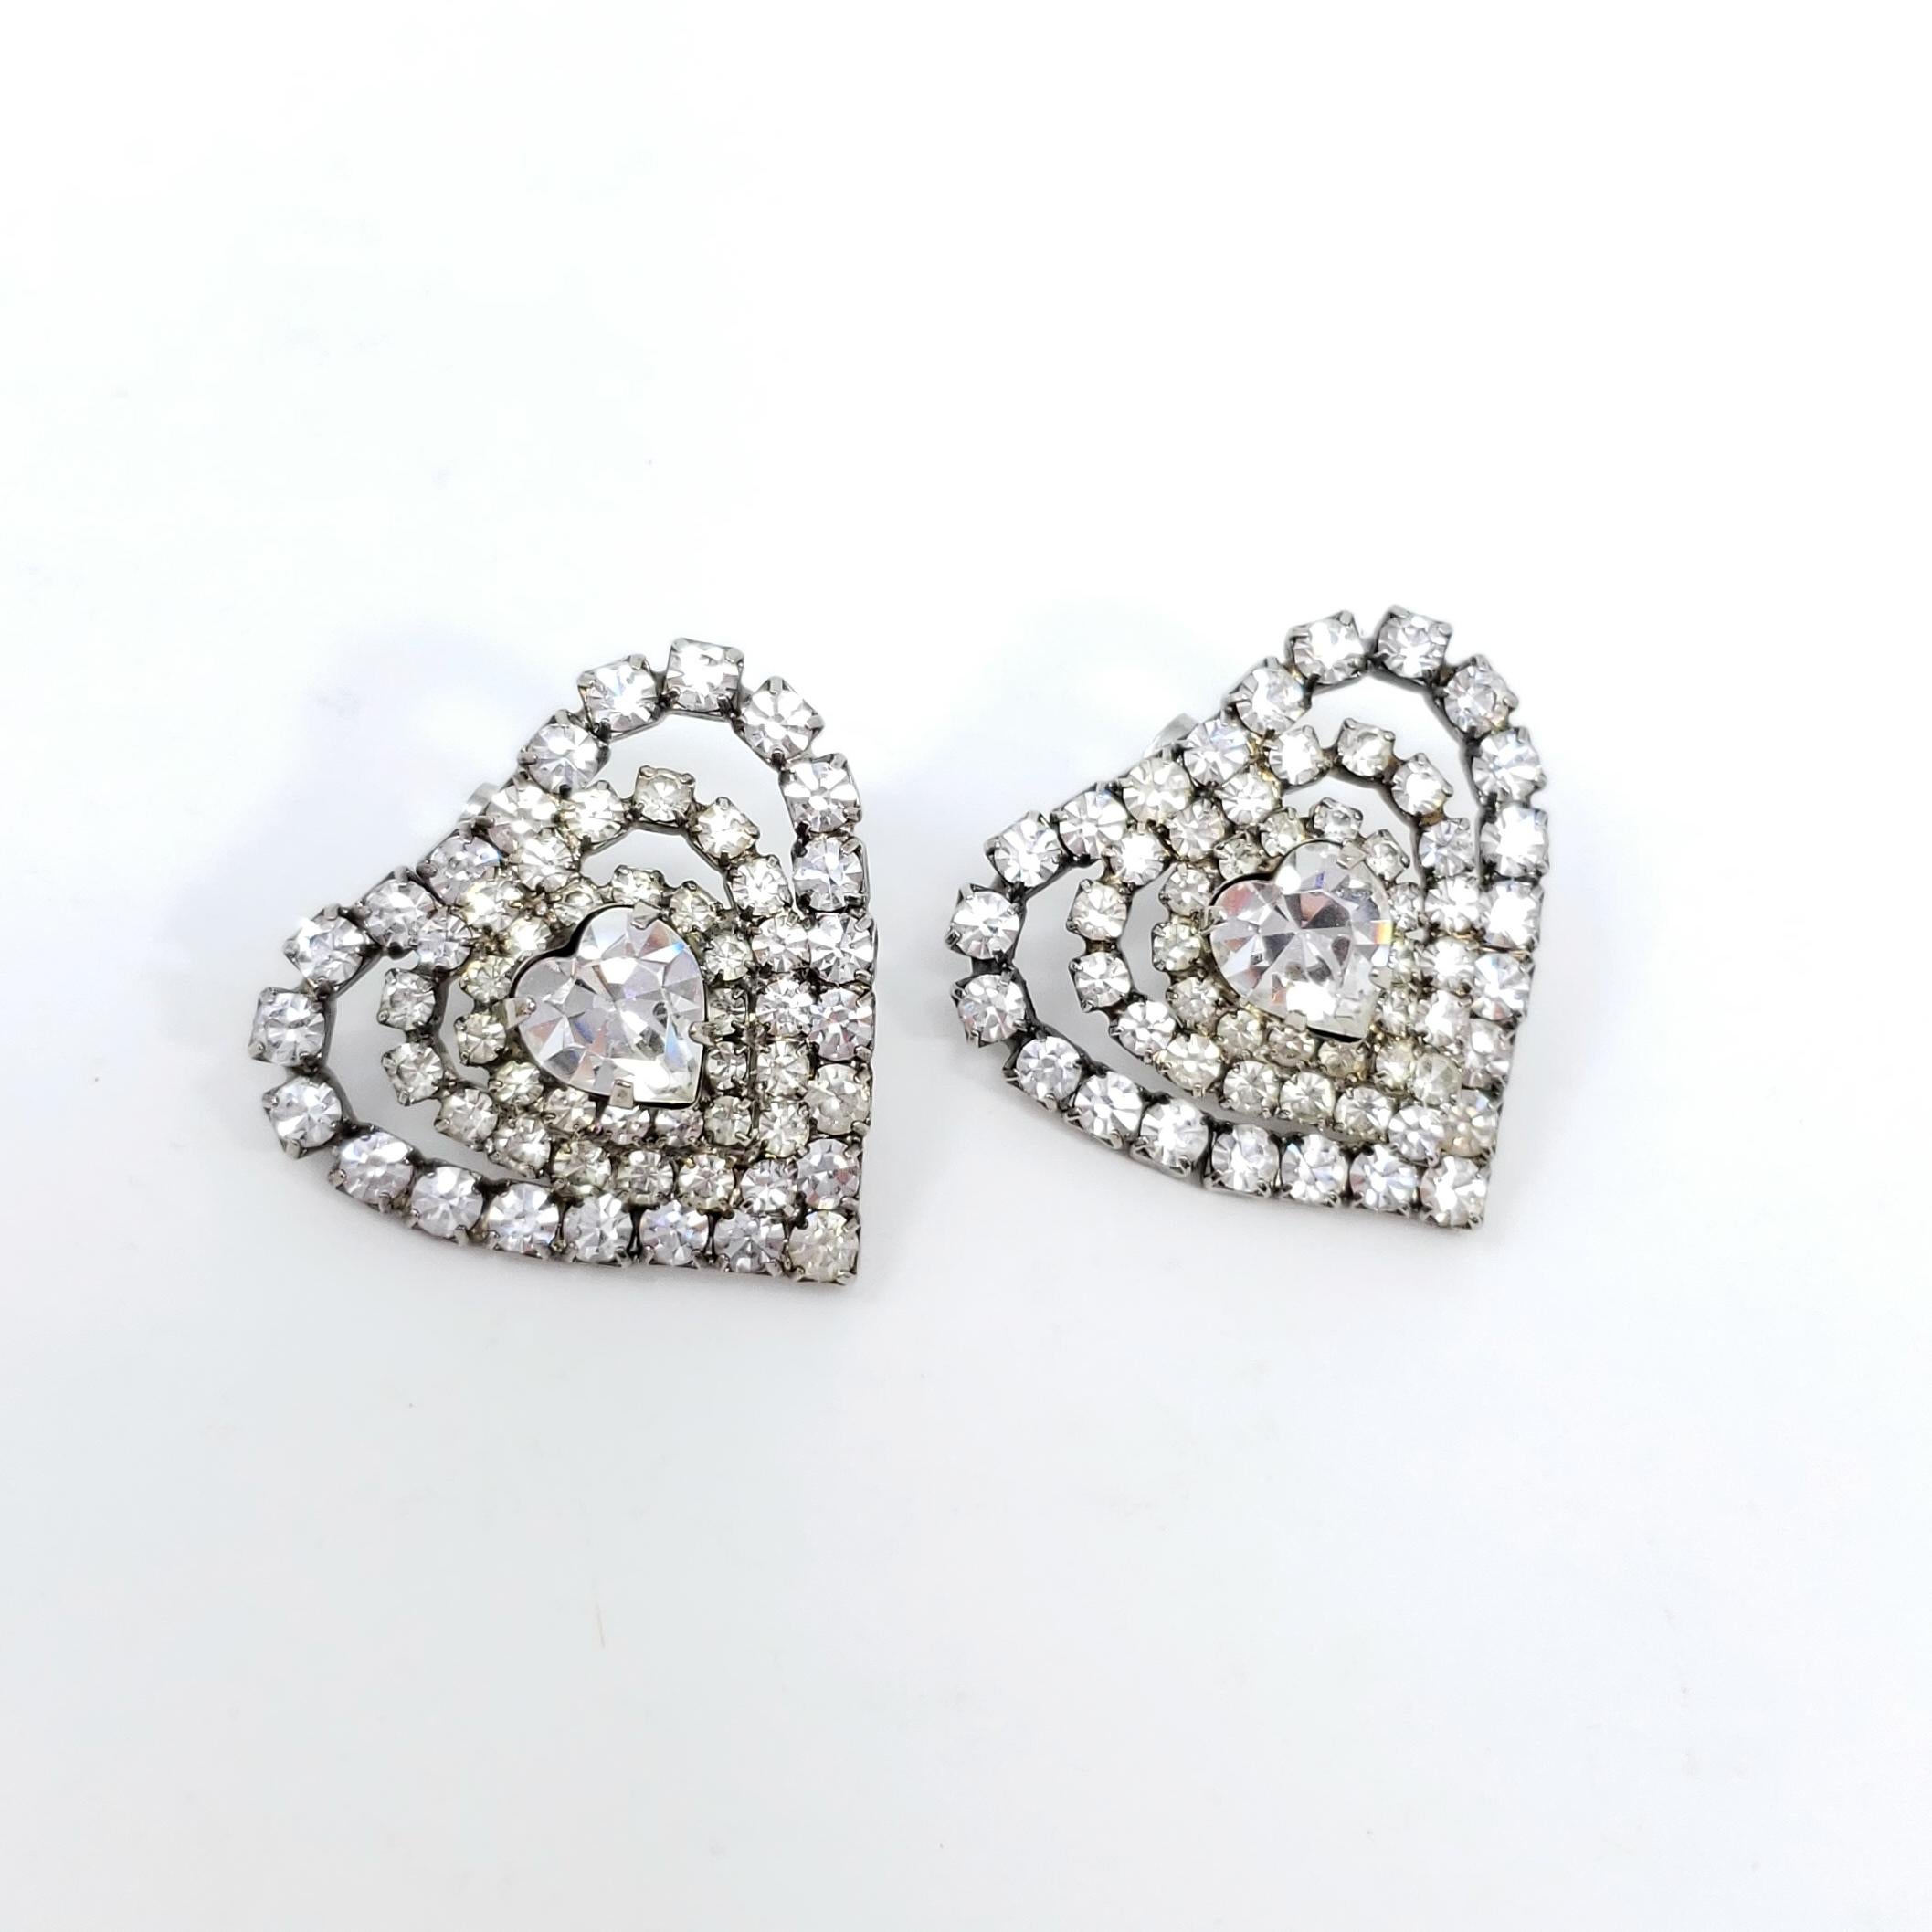 A stylish pair of vintage earrings! These glamorous hearts are decorated with dazzling clear crystals, prong-set in a silver-tone setting.

Post backs. Circa mid 1900s.